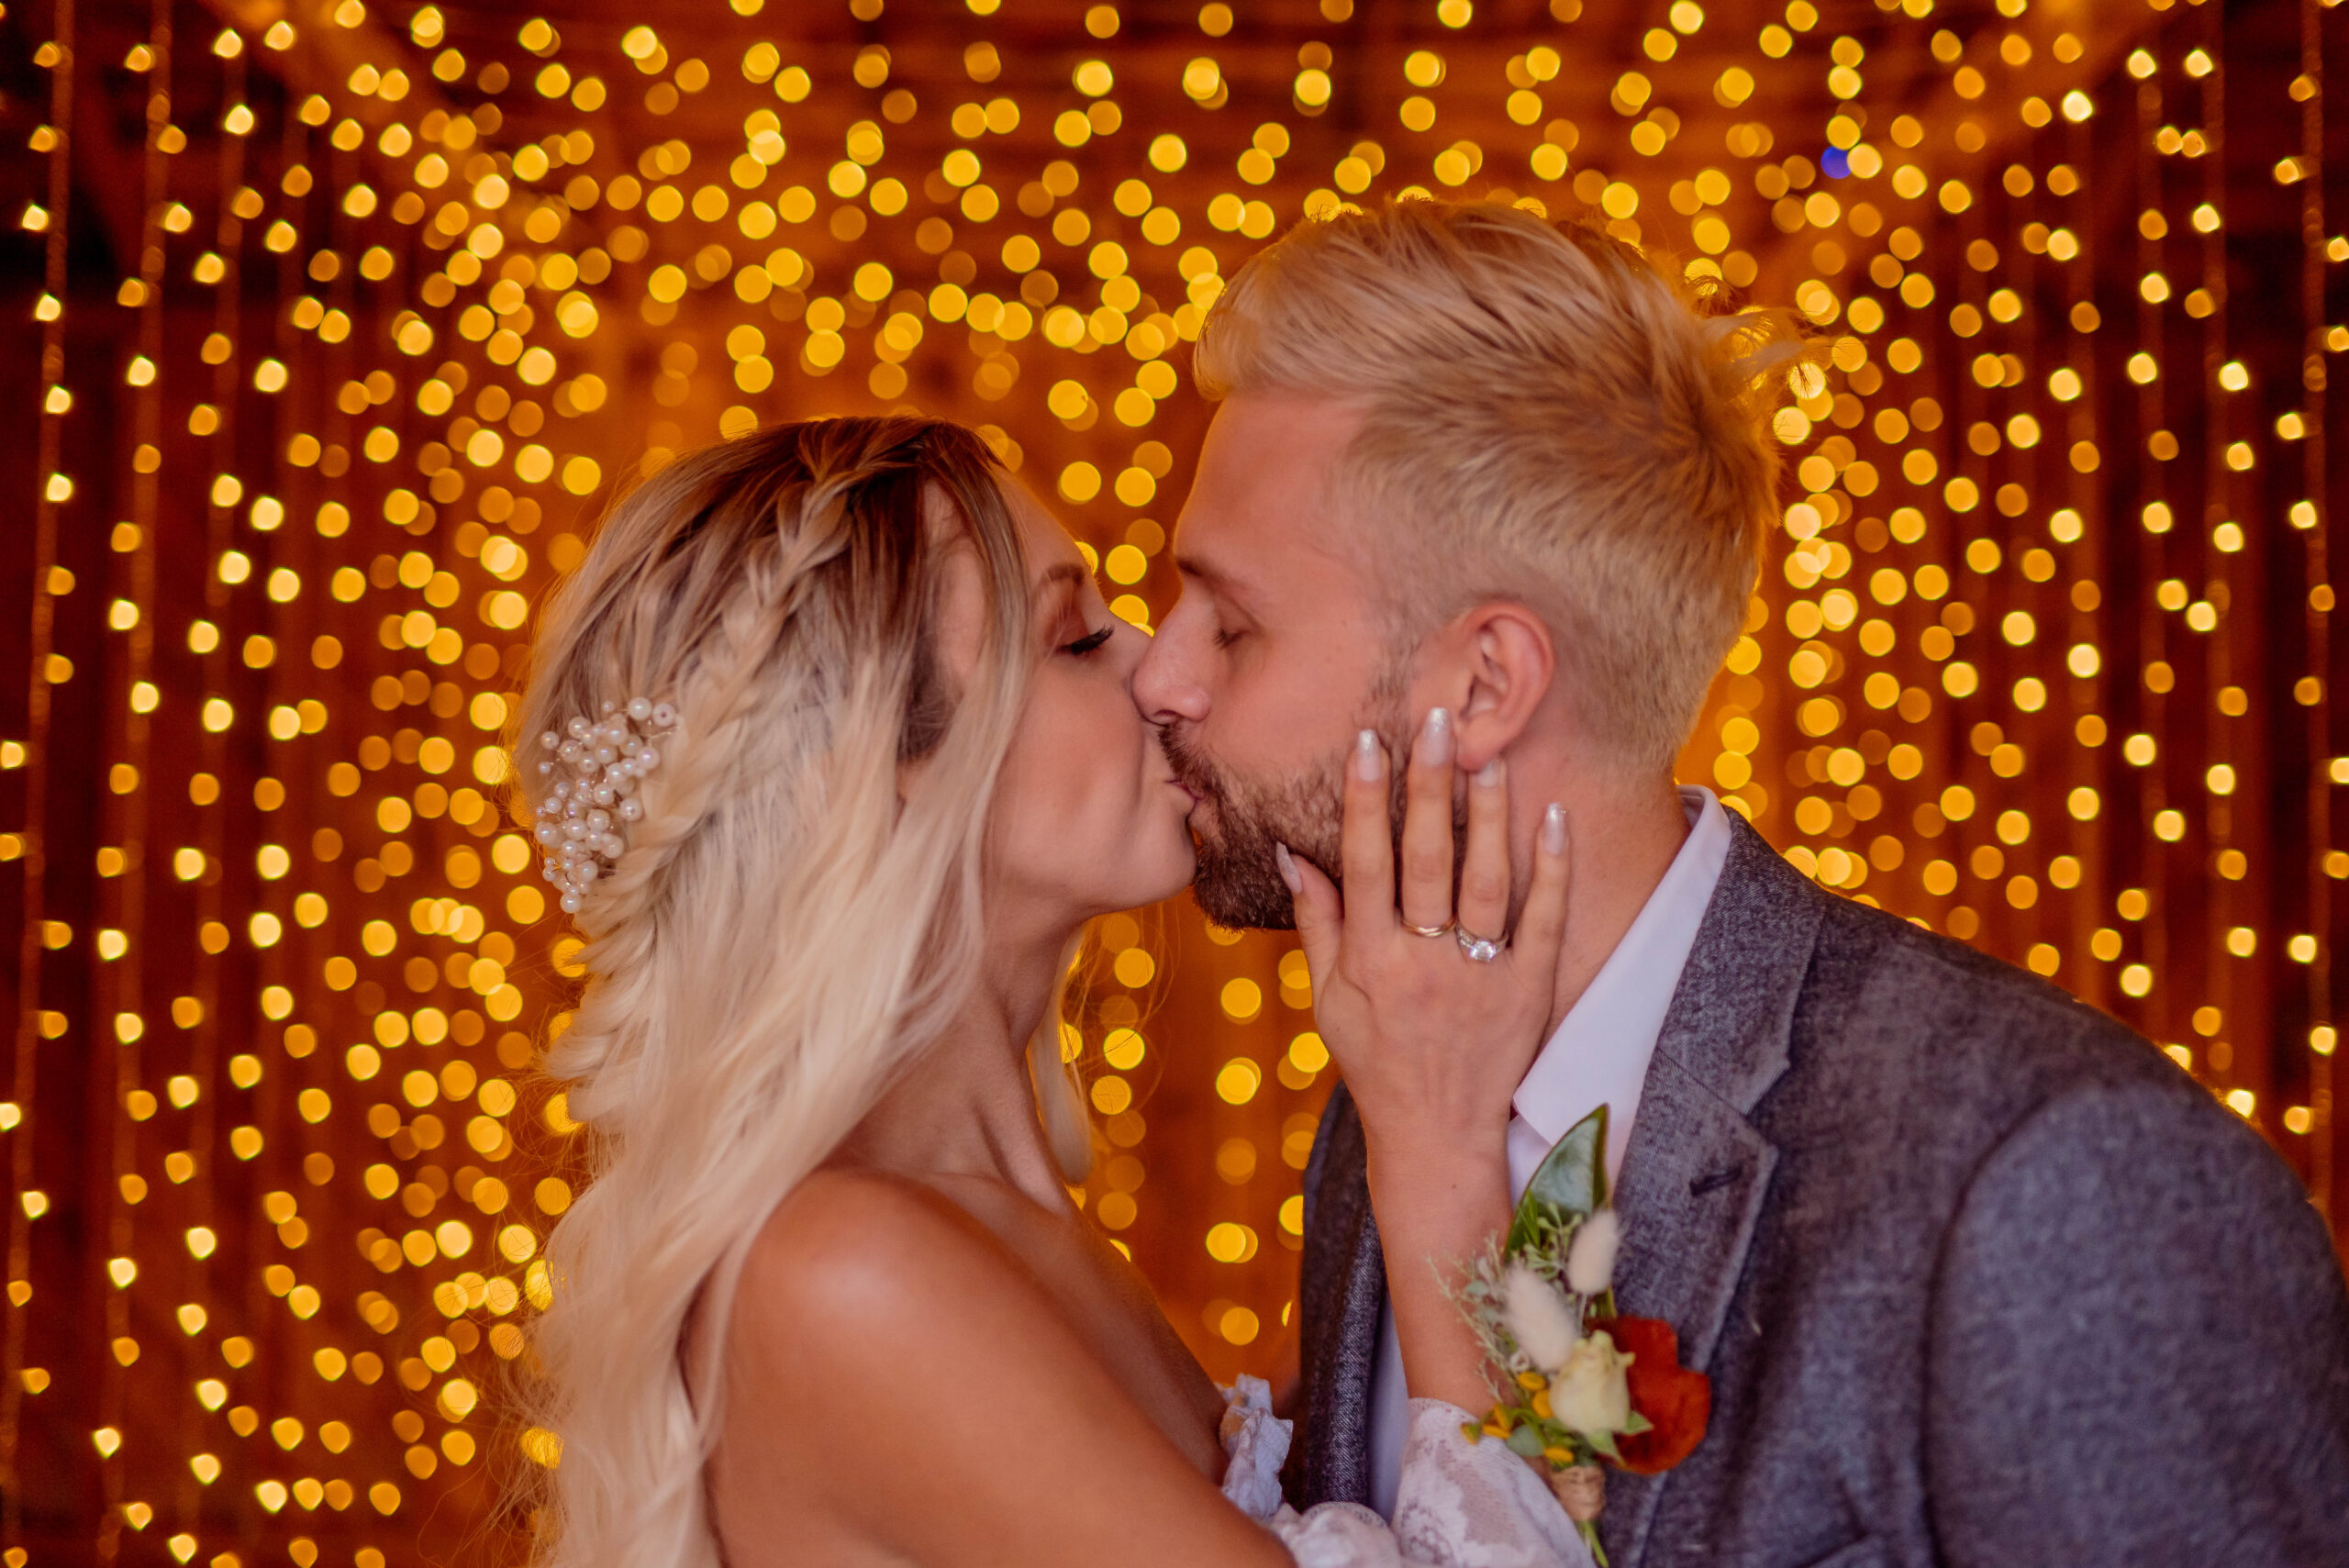 Bridge and Groom kissing with twinkle lights